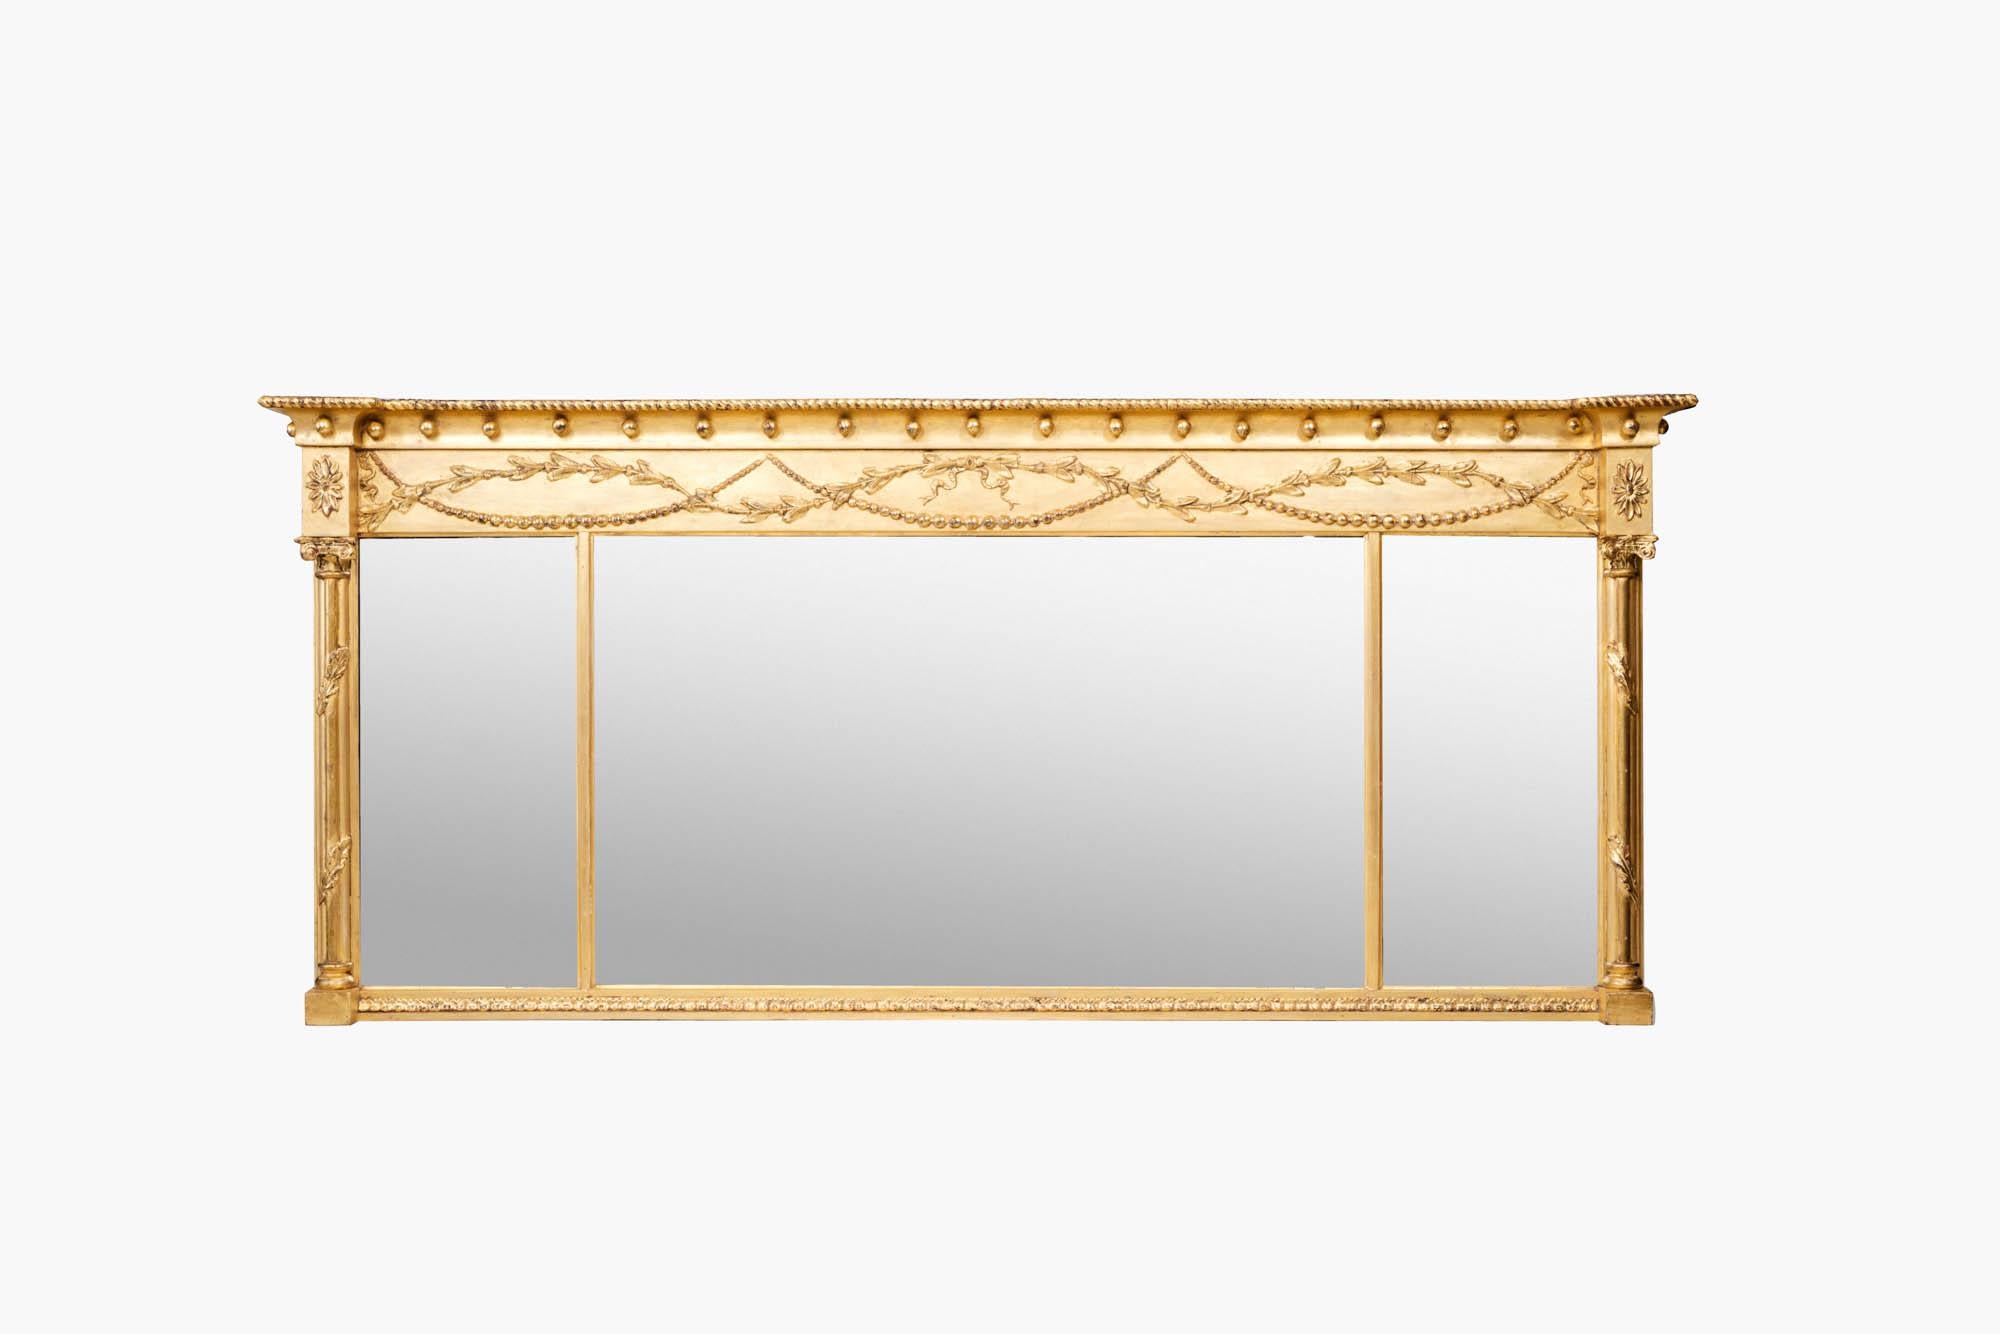 19th century Regency gilt compartmental overmantel mirror. This piece is of the rectangular form and flanked on either side by classical-style columns, with carved scrolling capitals to the tops. Both columns are wrapped in foliate garland